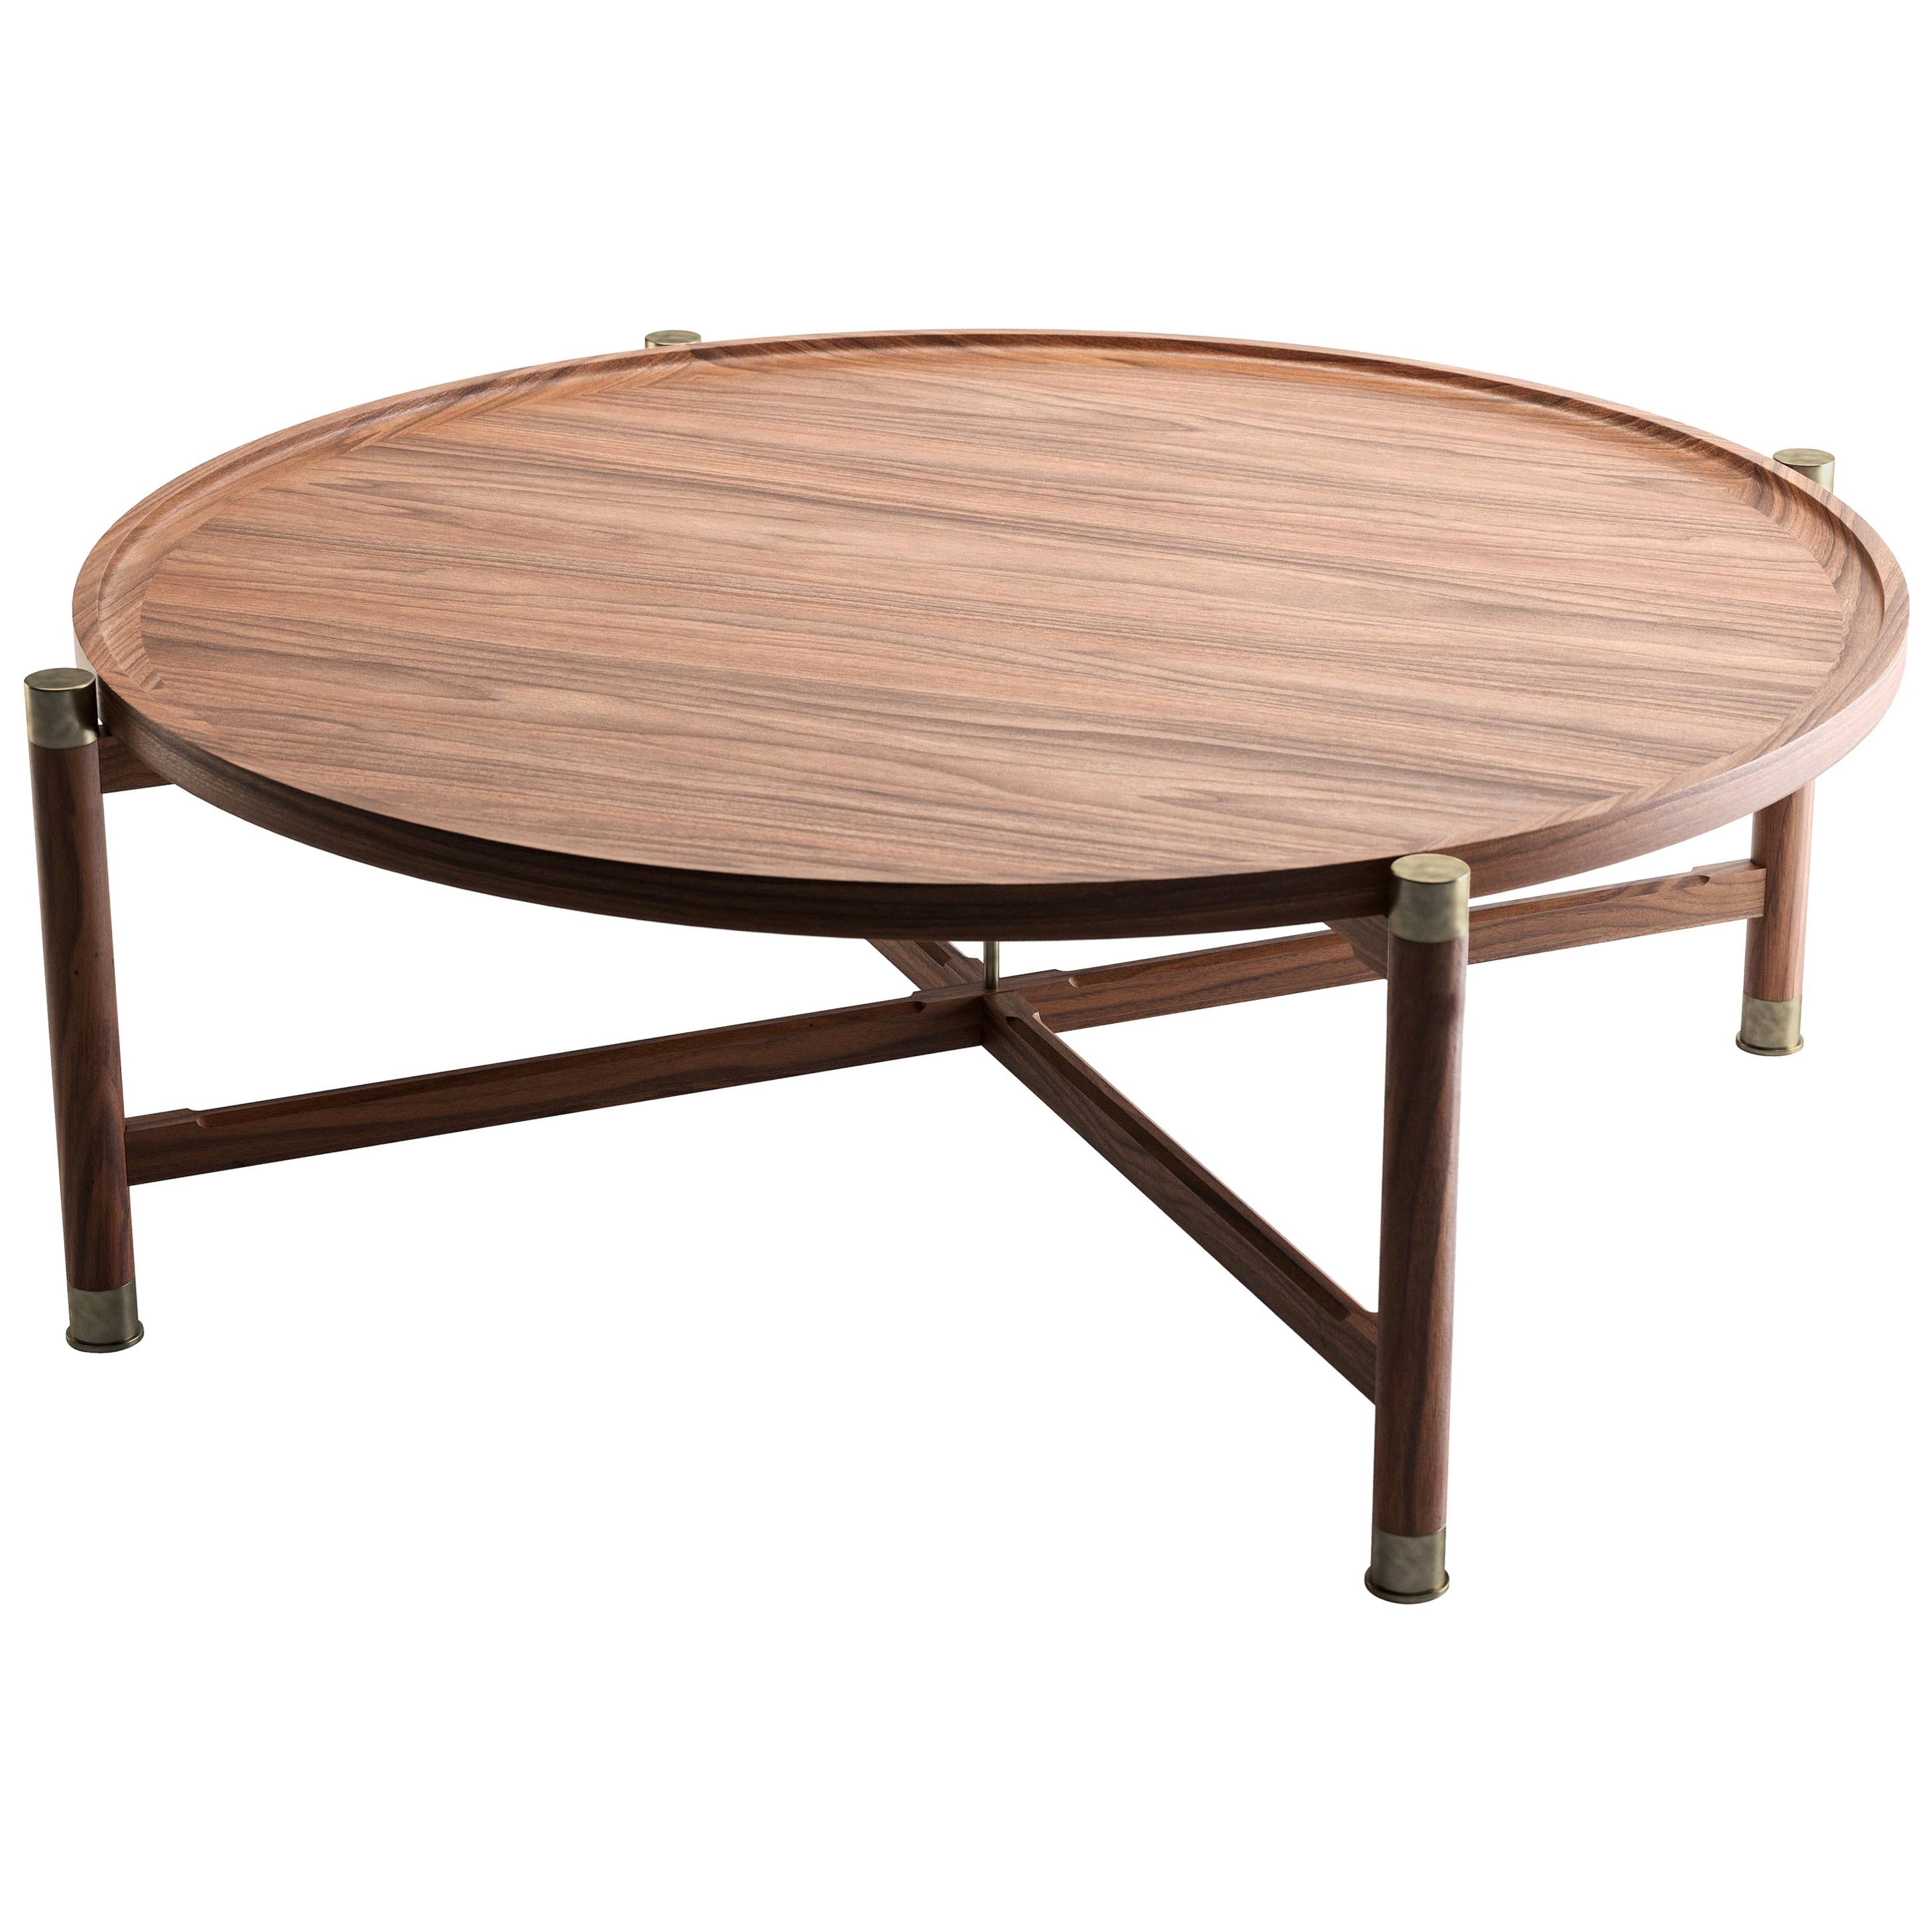 42" Custom, Otto Round Coffee Table in Lt Walnut with Antique Brass Fittings